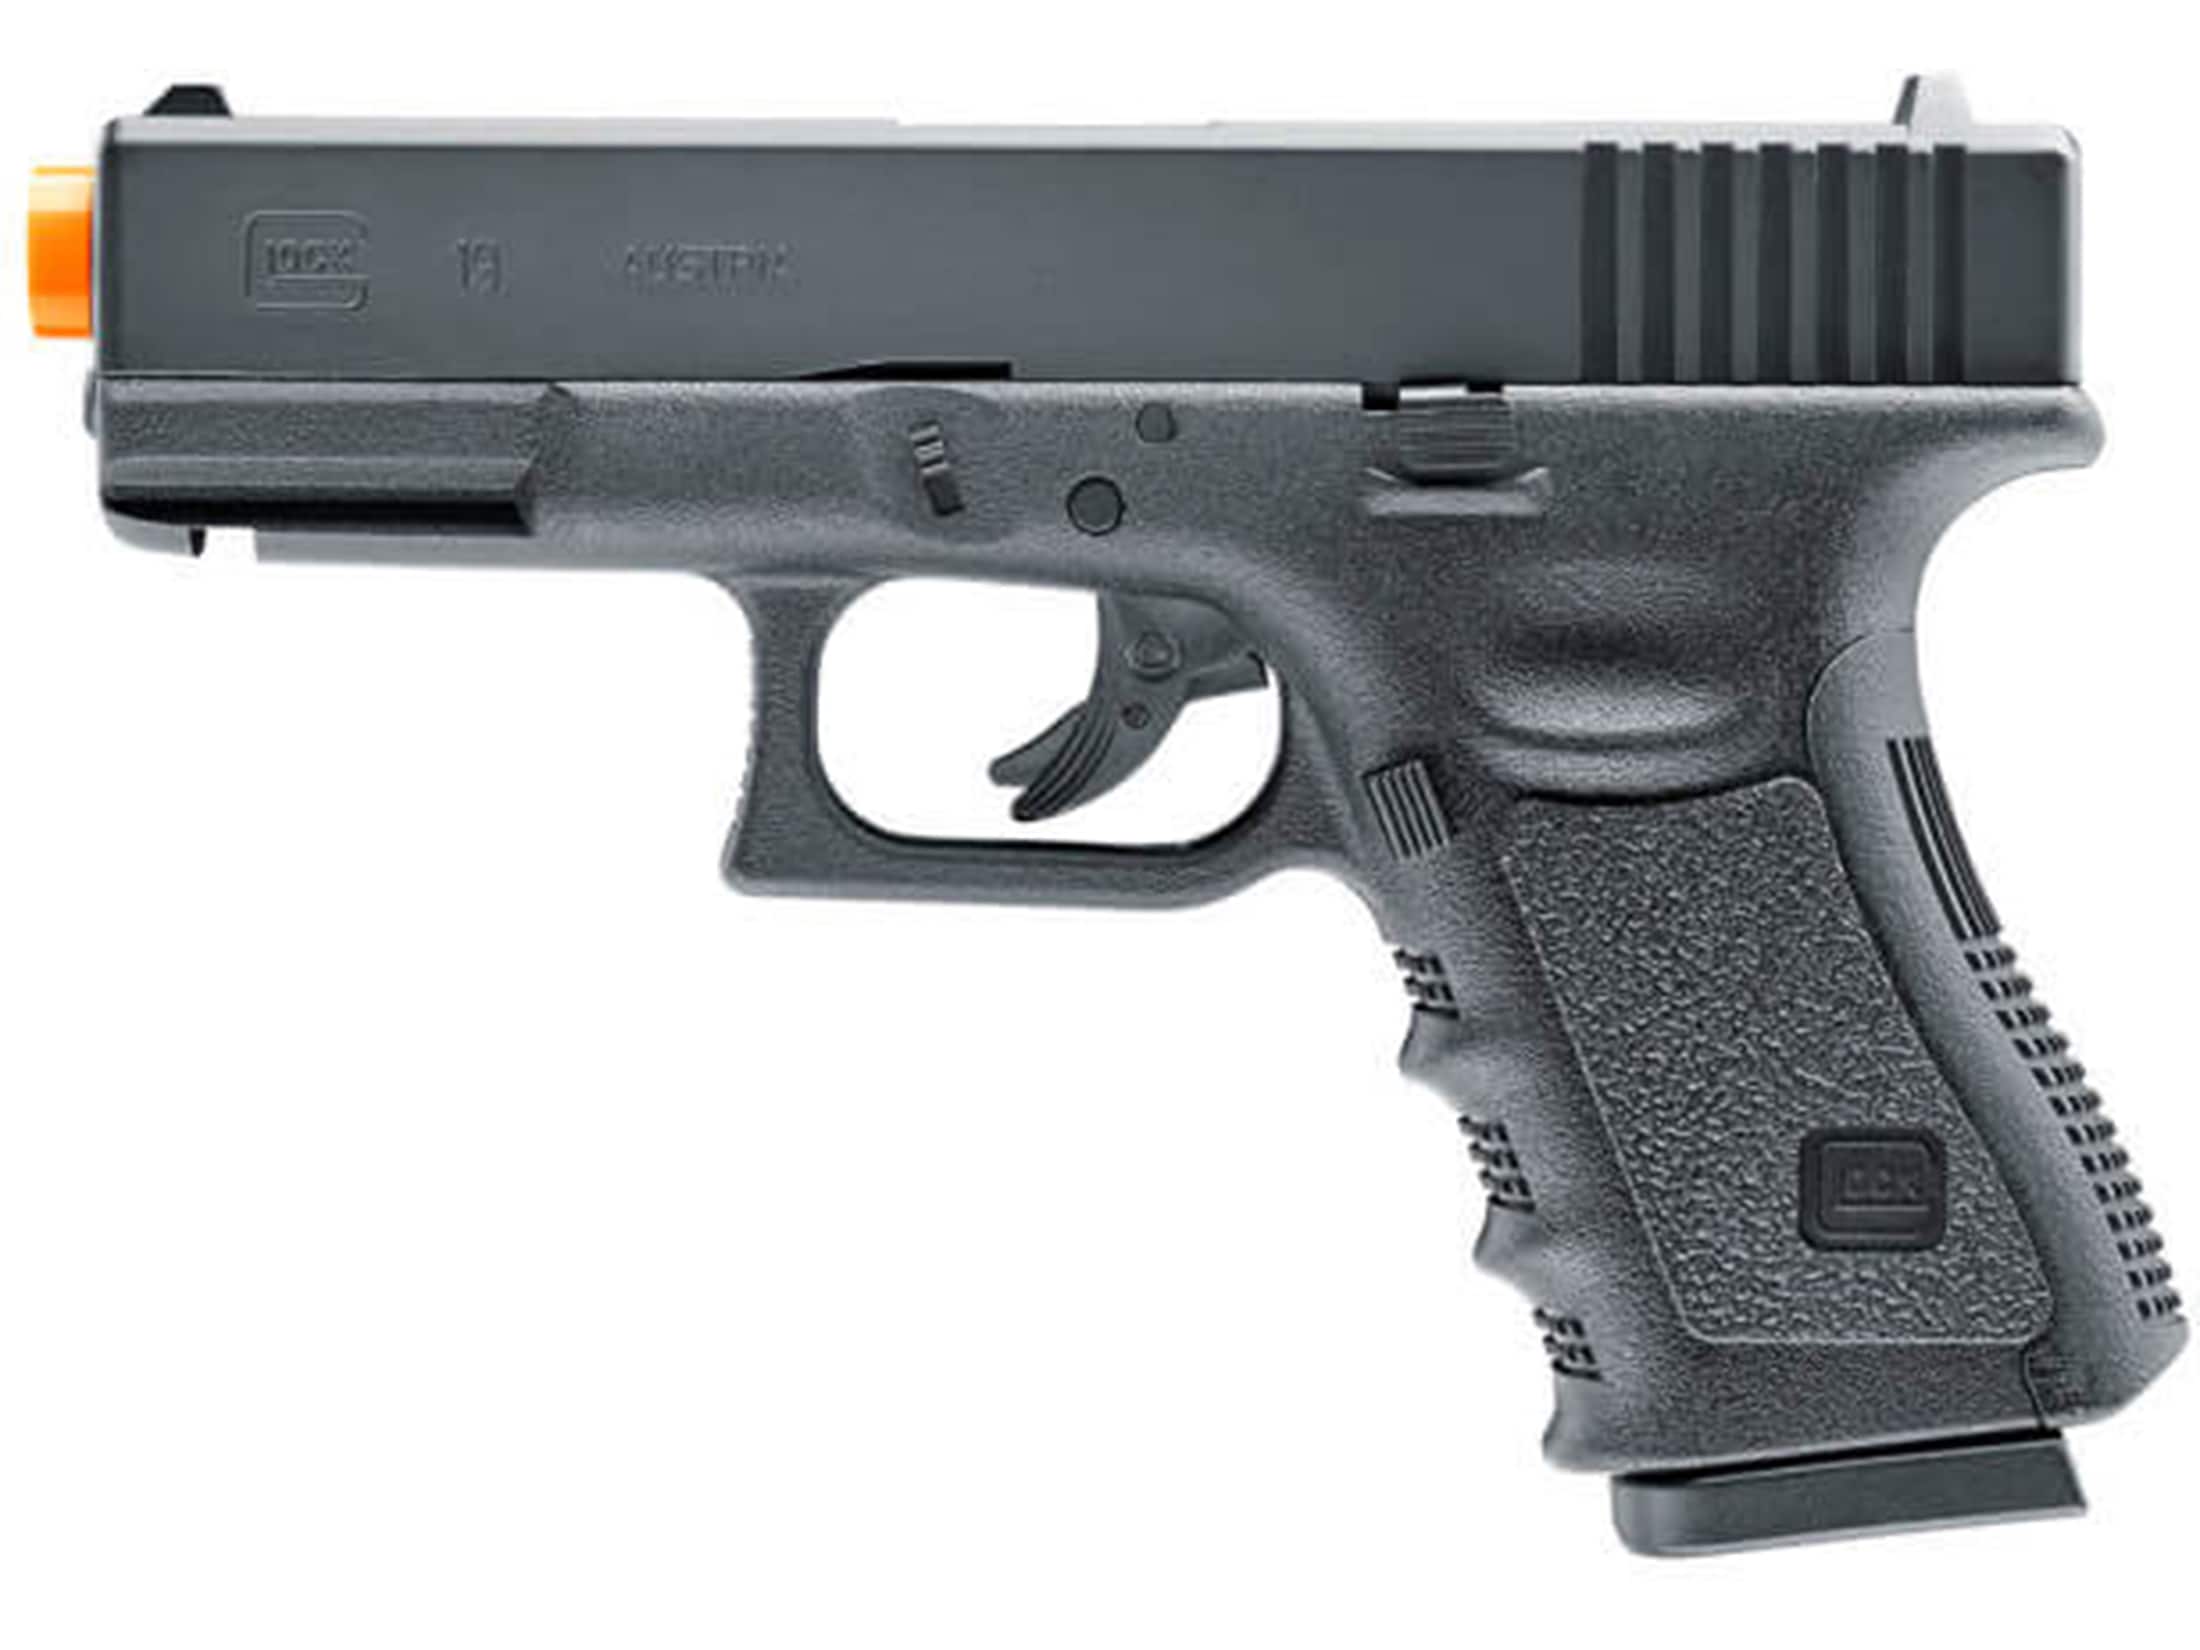 Glock 19 Gen 3 Airsoft Pistol 6mm BB CO2 Powered Semi-Automatic Black For Sale